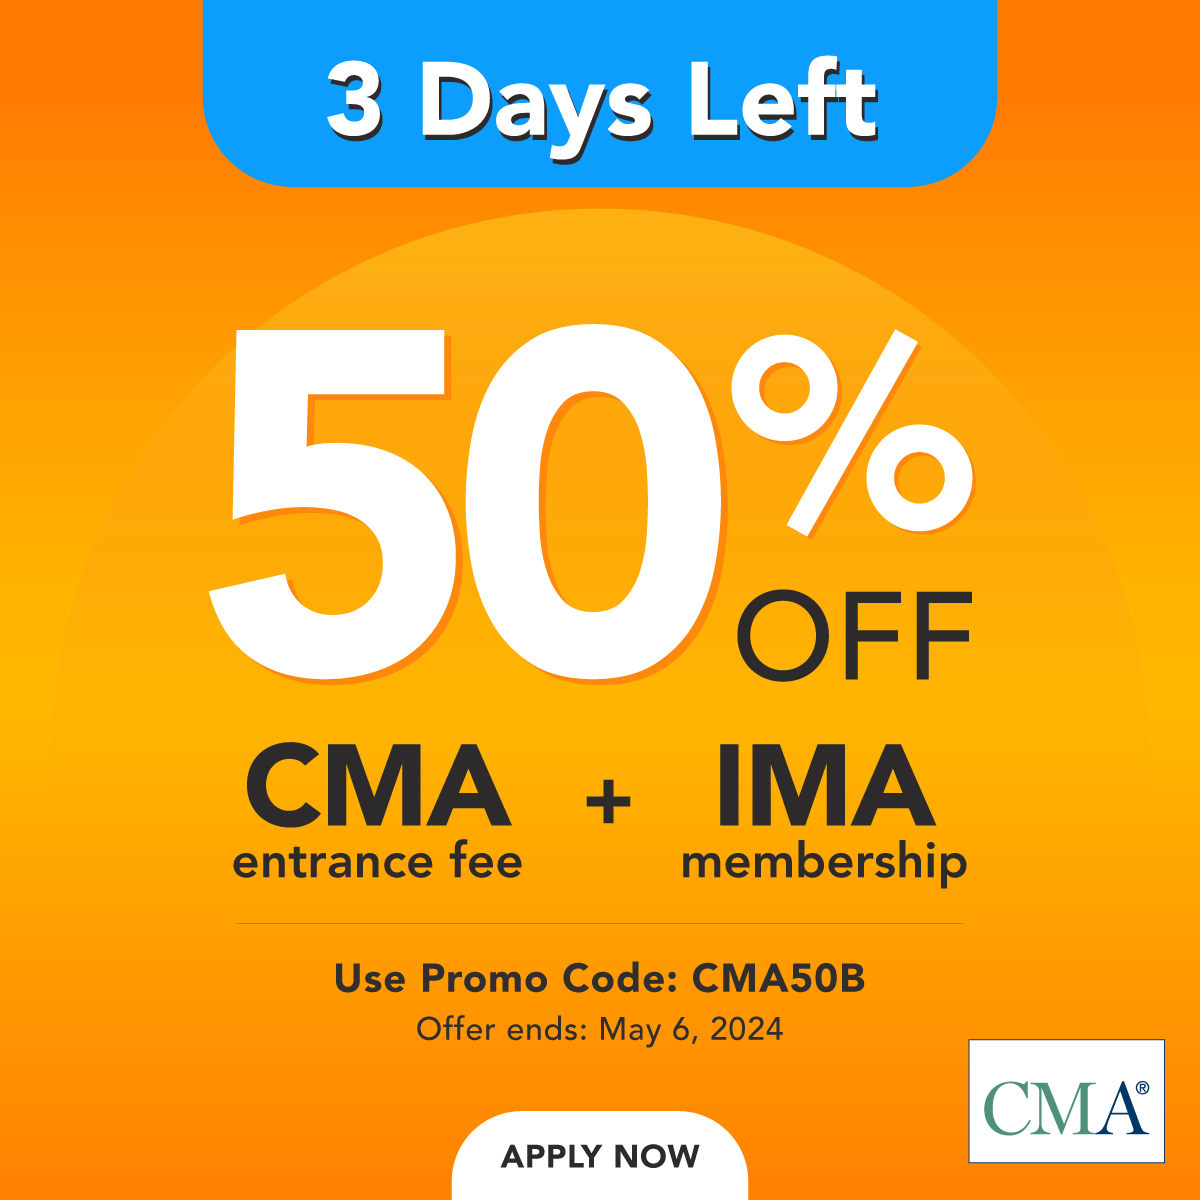 Have you taken advantage of our biggest offer yet? It ends in 3 days!

Save 50% on the CMA entrance fee and the IMA membership using discount code CMA50B.
Offer expires May 6, 2024.

Use promo code CMA50B
Enroll Now: bit.ly/4aZhgxl

#SpecialOffer #IMA #Promo